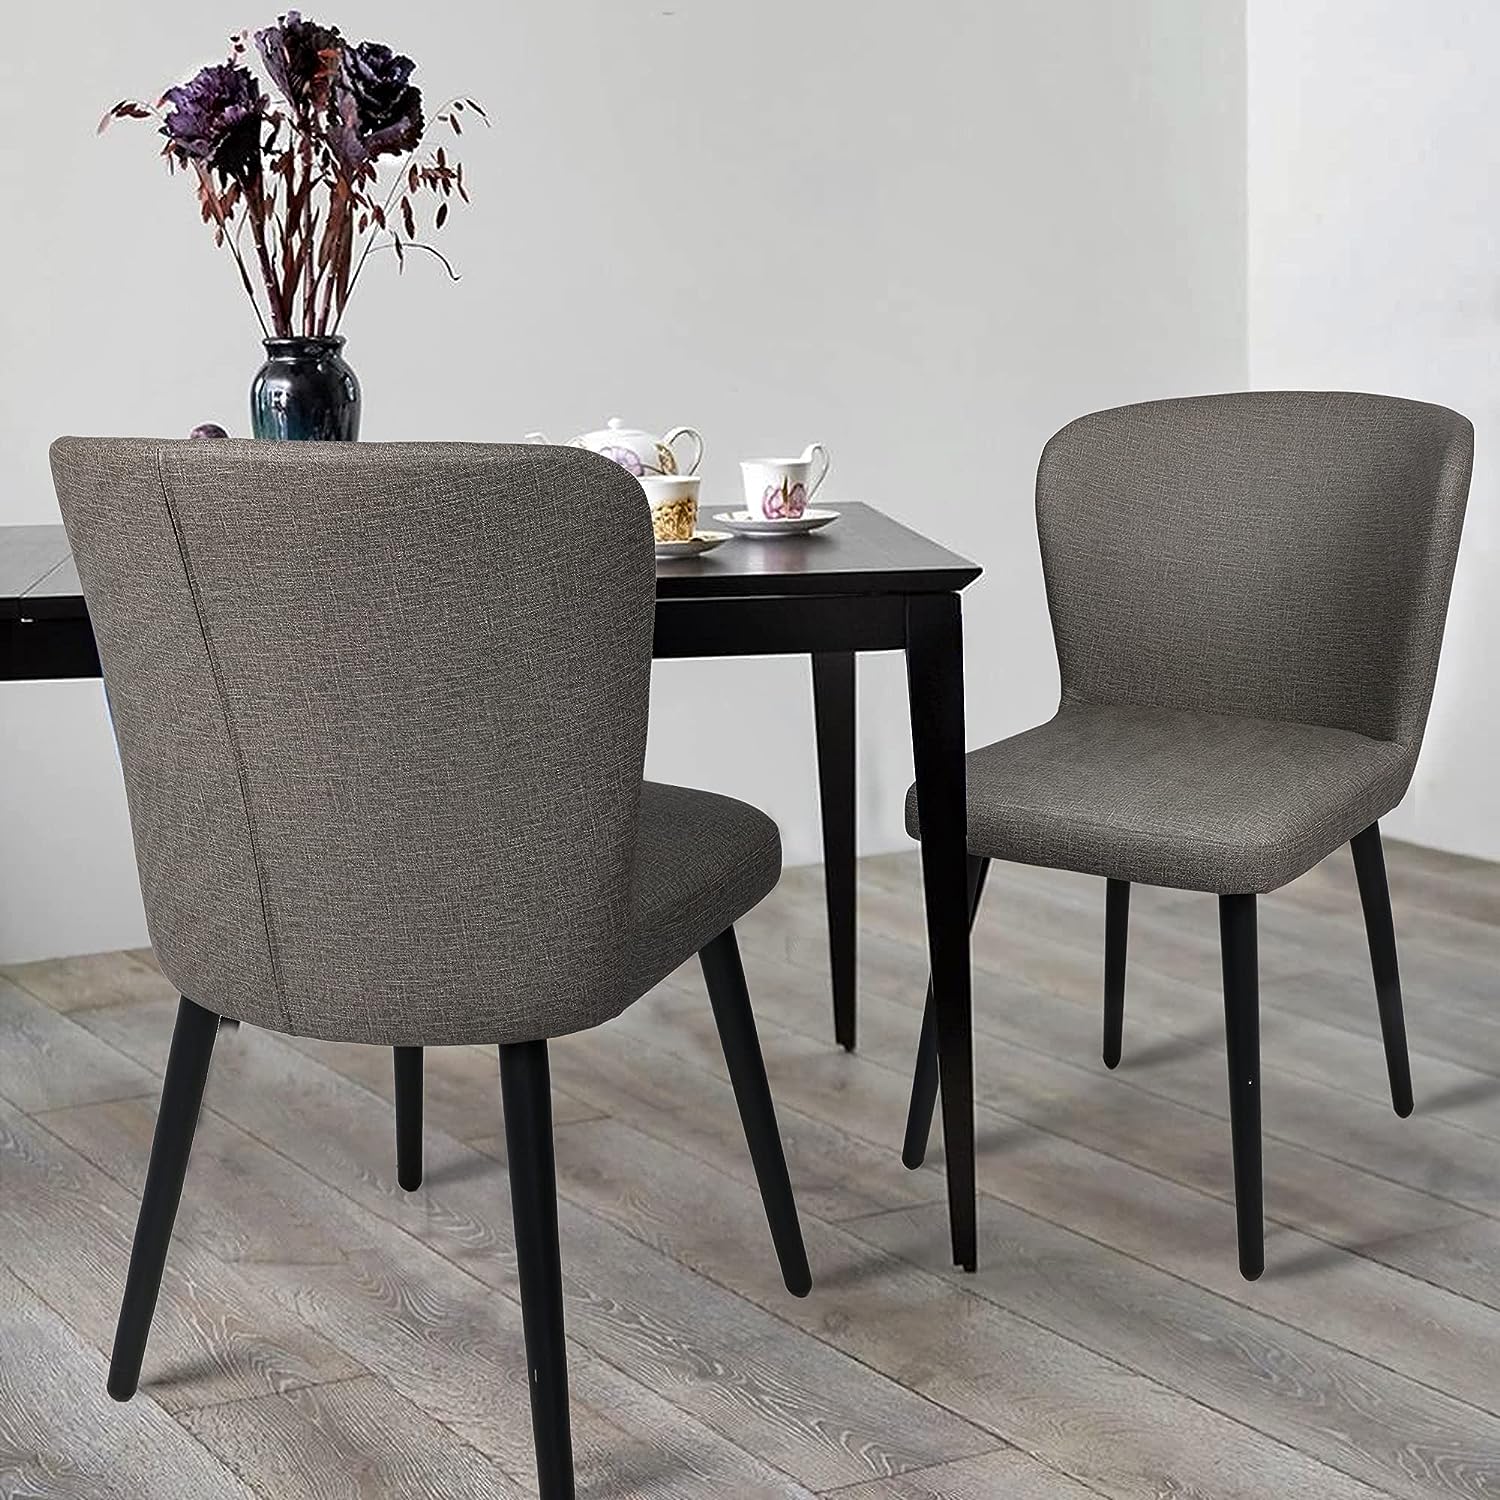 LUCKYERMORE Set of 2 Dining Room Chairs Upholstered Side Chairs with Soft PU Leather Seat Backrest, Gray